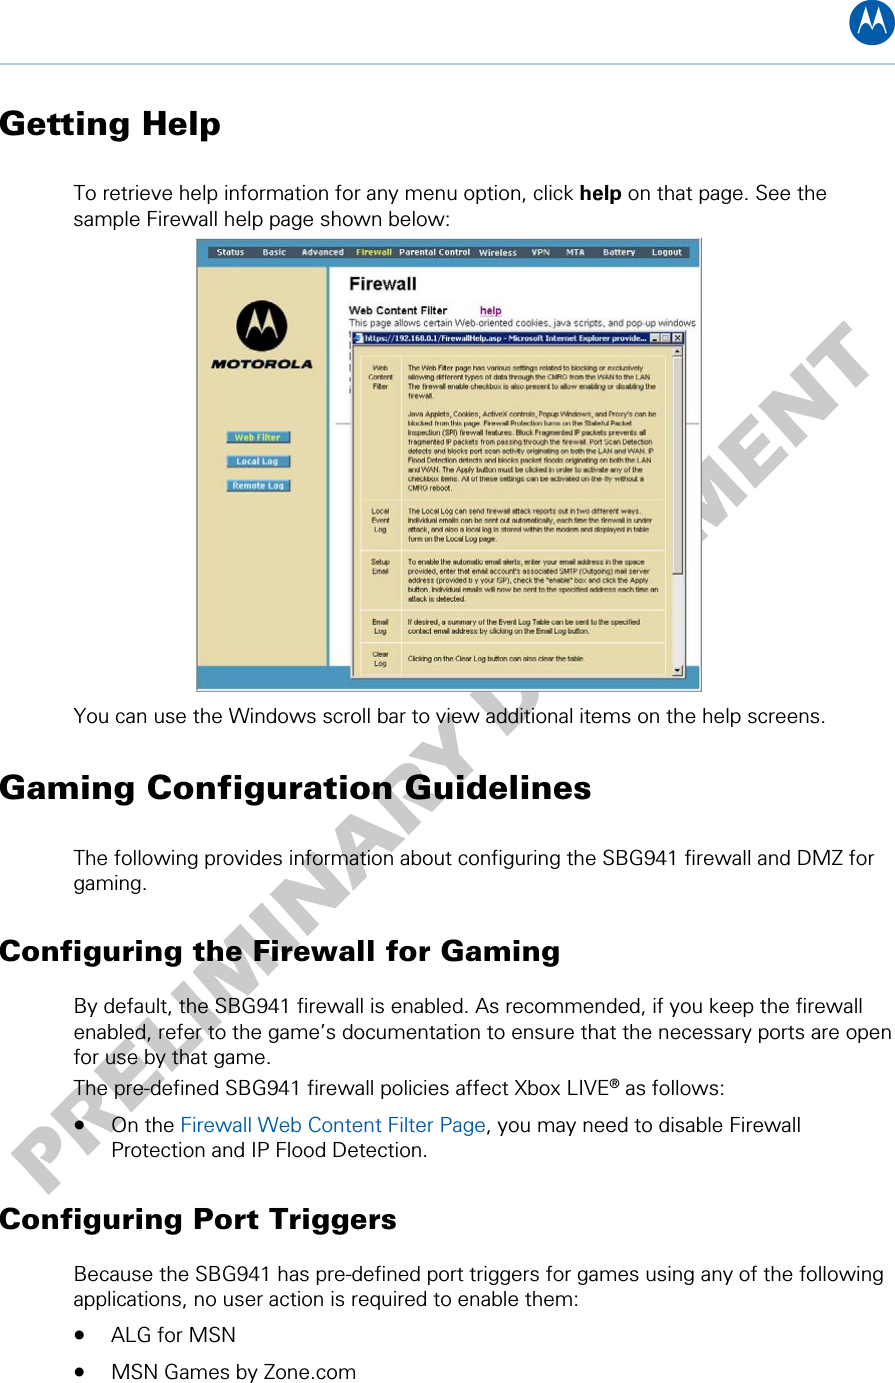 B Getting Help To retrieve help information for any menu option, click help on that page. See the sample Firewall help page shown below:  You can use the Windows scroll bar to view additional items on the help screens. Gaming Configuration Guidelines The following provides information about configuring the SBG941 firewall and DMZ for gaming. Configuring the Firewall for Gaming By default, the SBG941 firewall is enabled. As recommended, if you keep the firewall enabled, refer to the game’s documentation to ensure that the necessary ports are open for use by that game. The pre-defined SBG941 firewall policies affect Xbox LIVE® as follows: • On the Firewall Web Content Filter Page, you may need to disable Firewall Protection and IP Flood Detection. Configuring Port Triggers Because the SBG941 has pre-defined port triggers for games using any of the following applications, no user action is required to enable them: • ALG for MSN • MSN Games by Zone.com 4 • Basic Configuration 21   